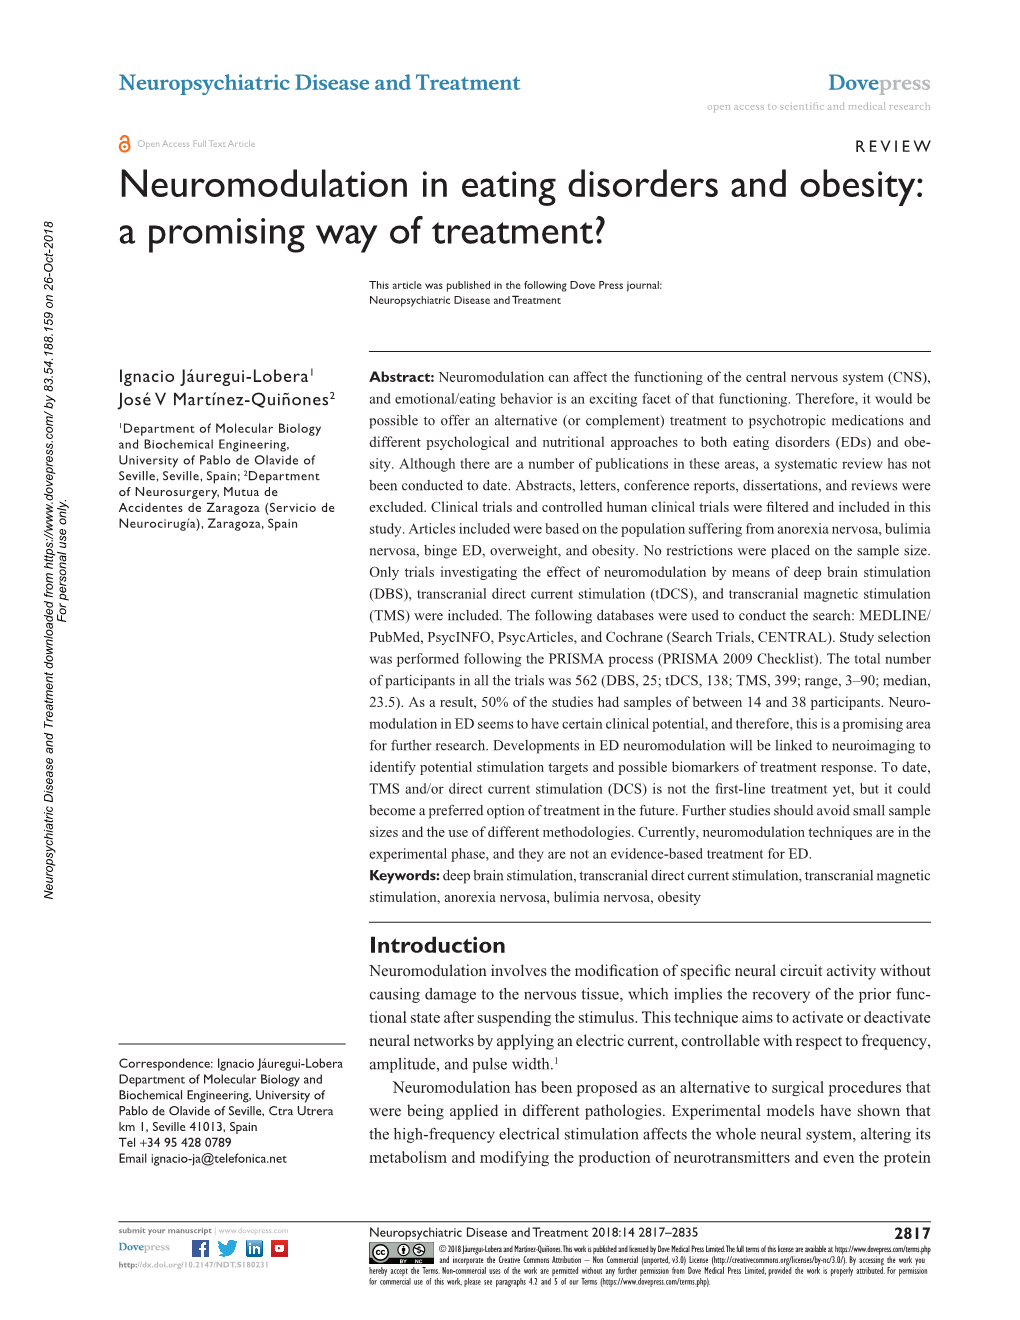 Neuromodulation in Eating Disorders and Obesity: a Promising Way of Treatment?